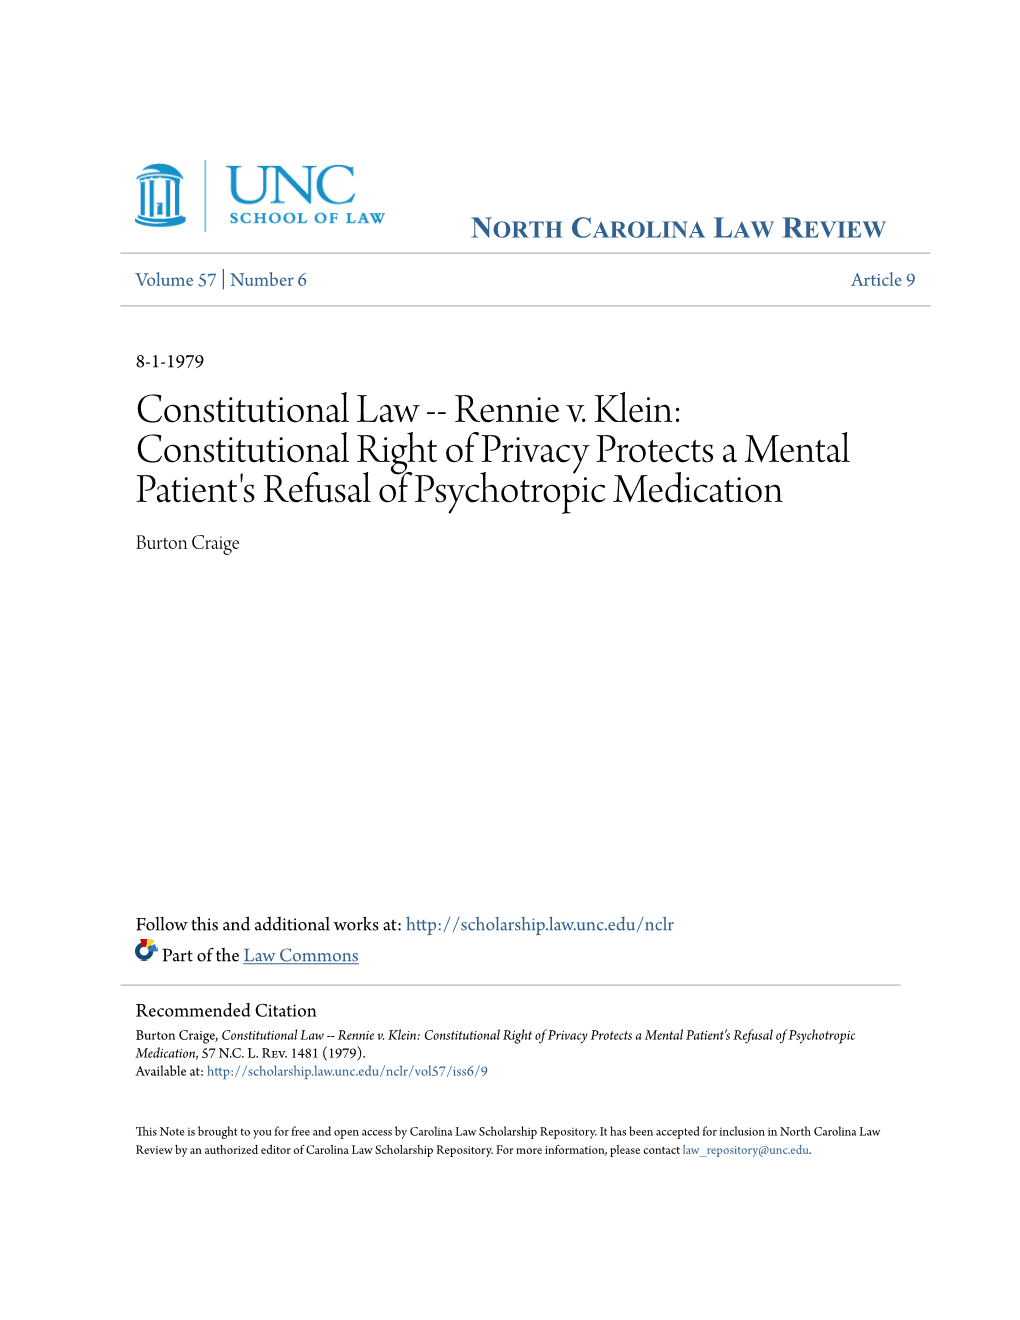 Rennie V. Klein: Constitutional Right of Privacy Protects a Mental Patient's Refusal of Psychotropic Medication Burton Craige